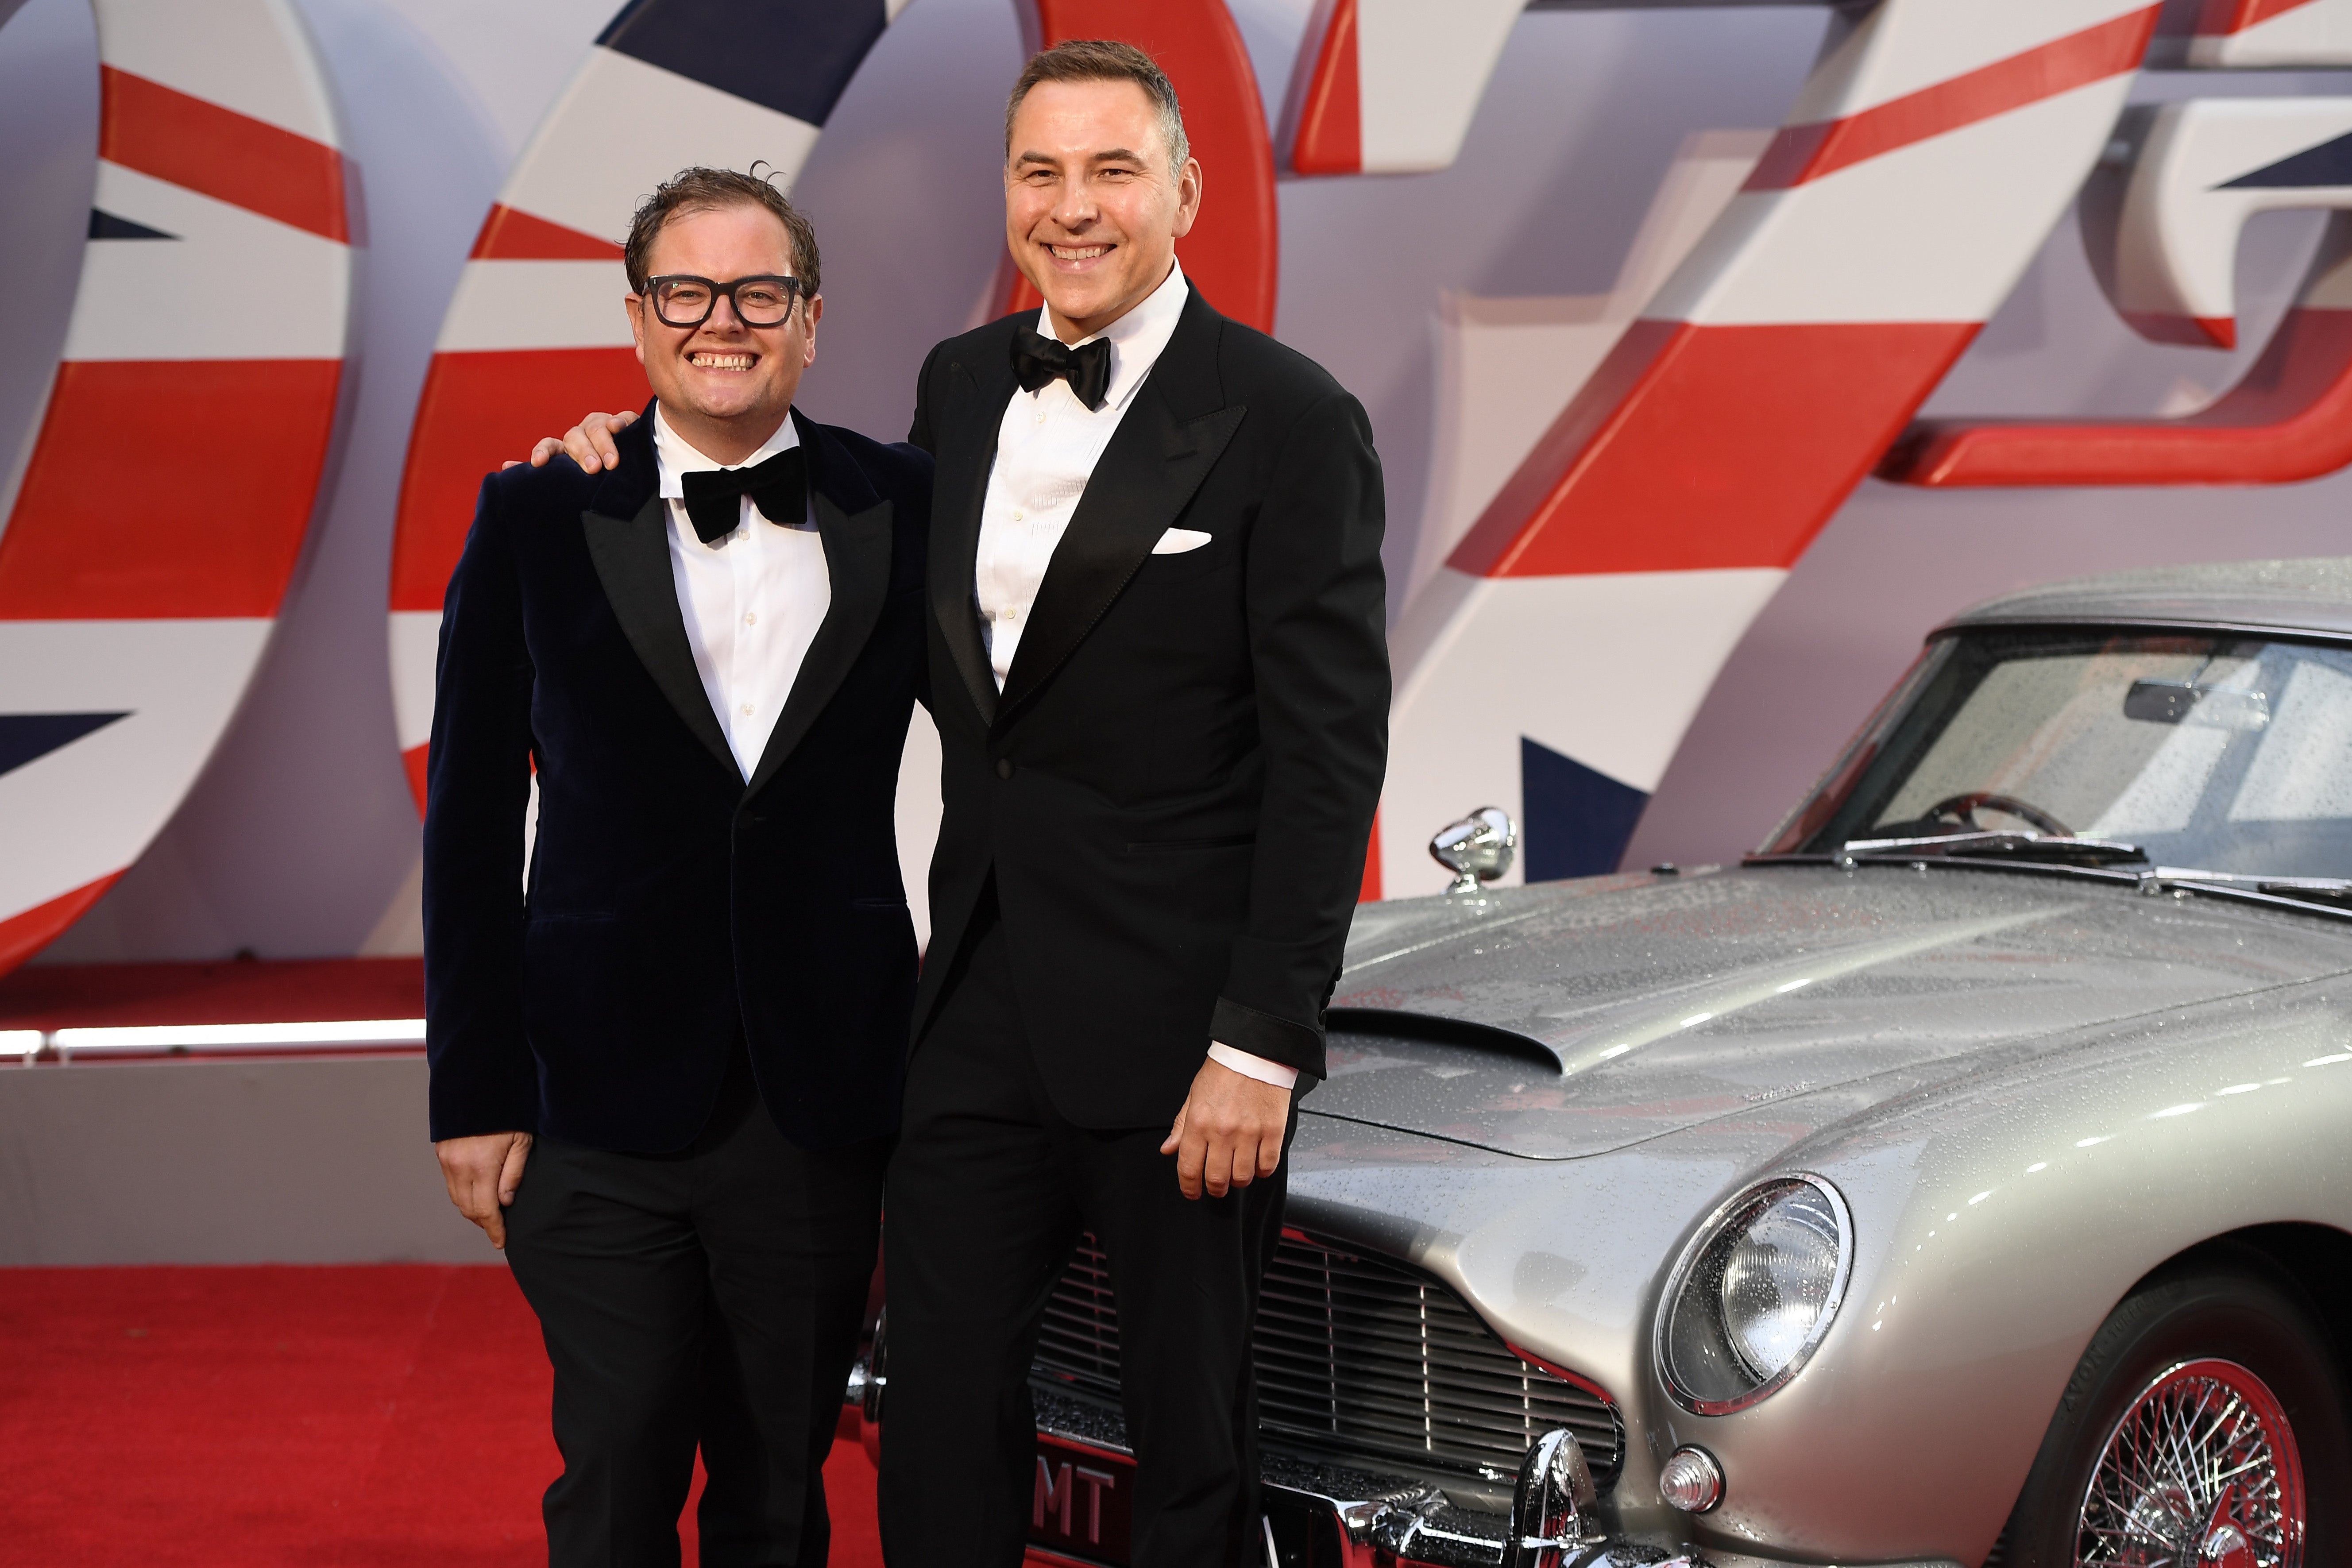 Carr (left) will reportedly replace Walliams after 10 years on the judging panel